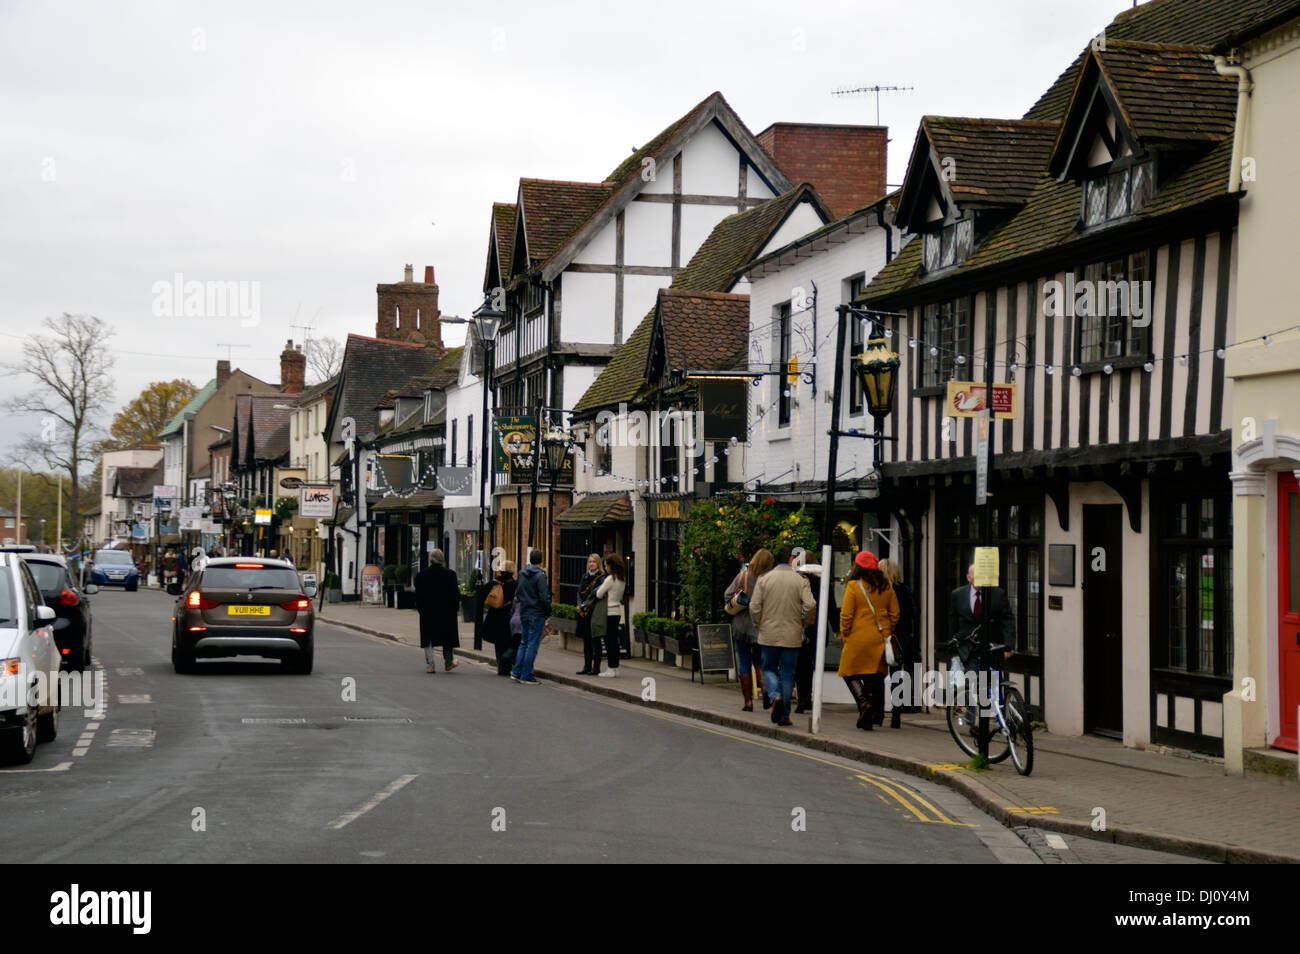 Half timbered buildings on a street in Stratford upon Avon Stock Photo